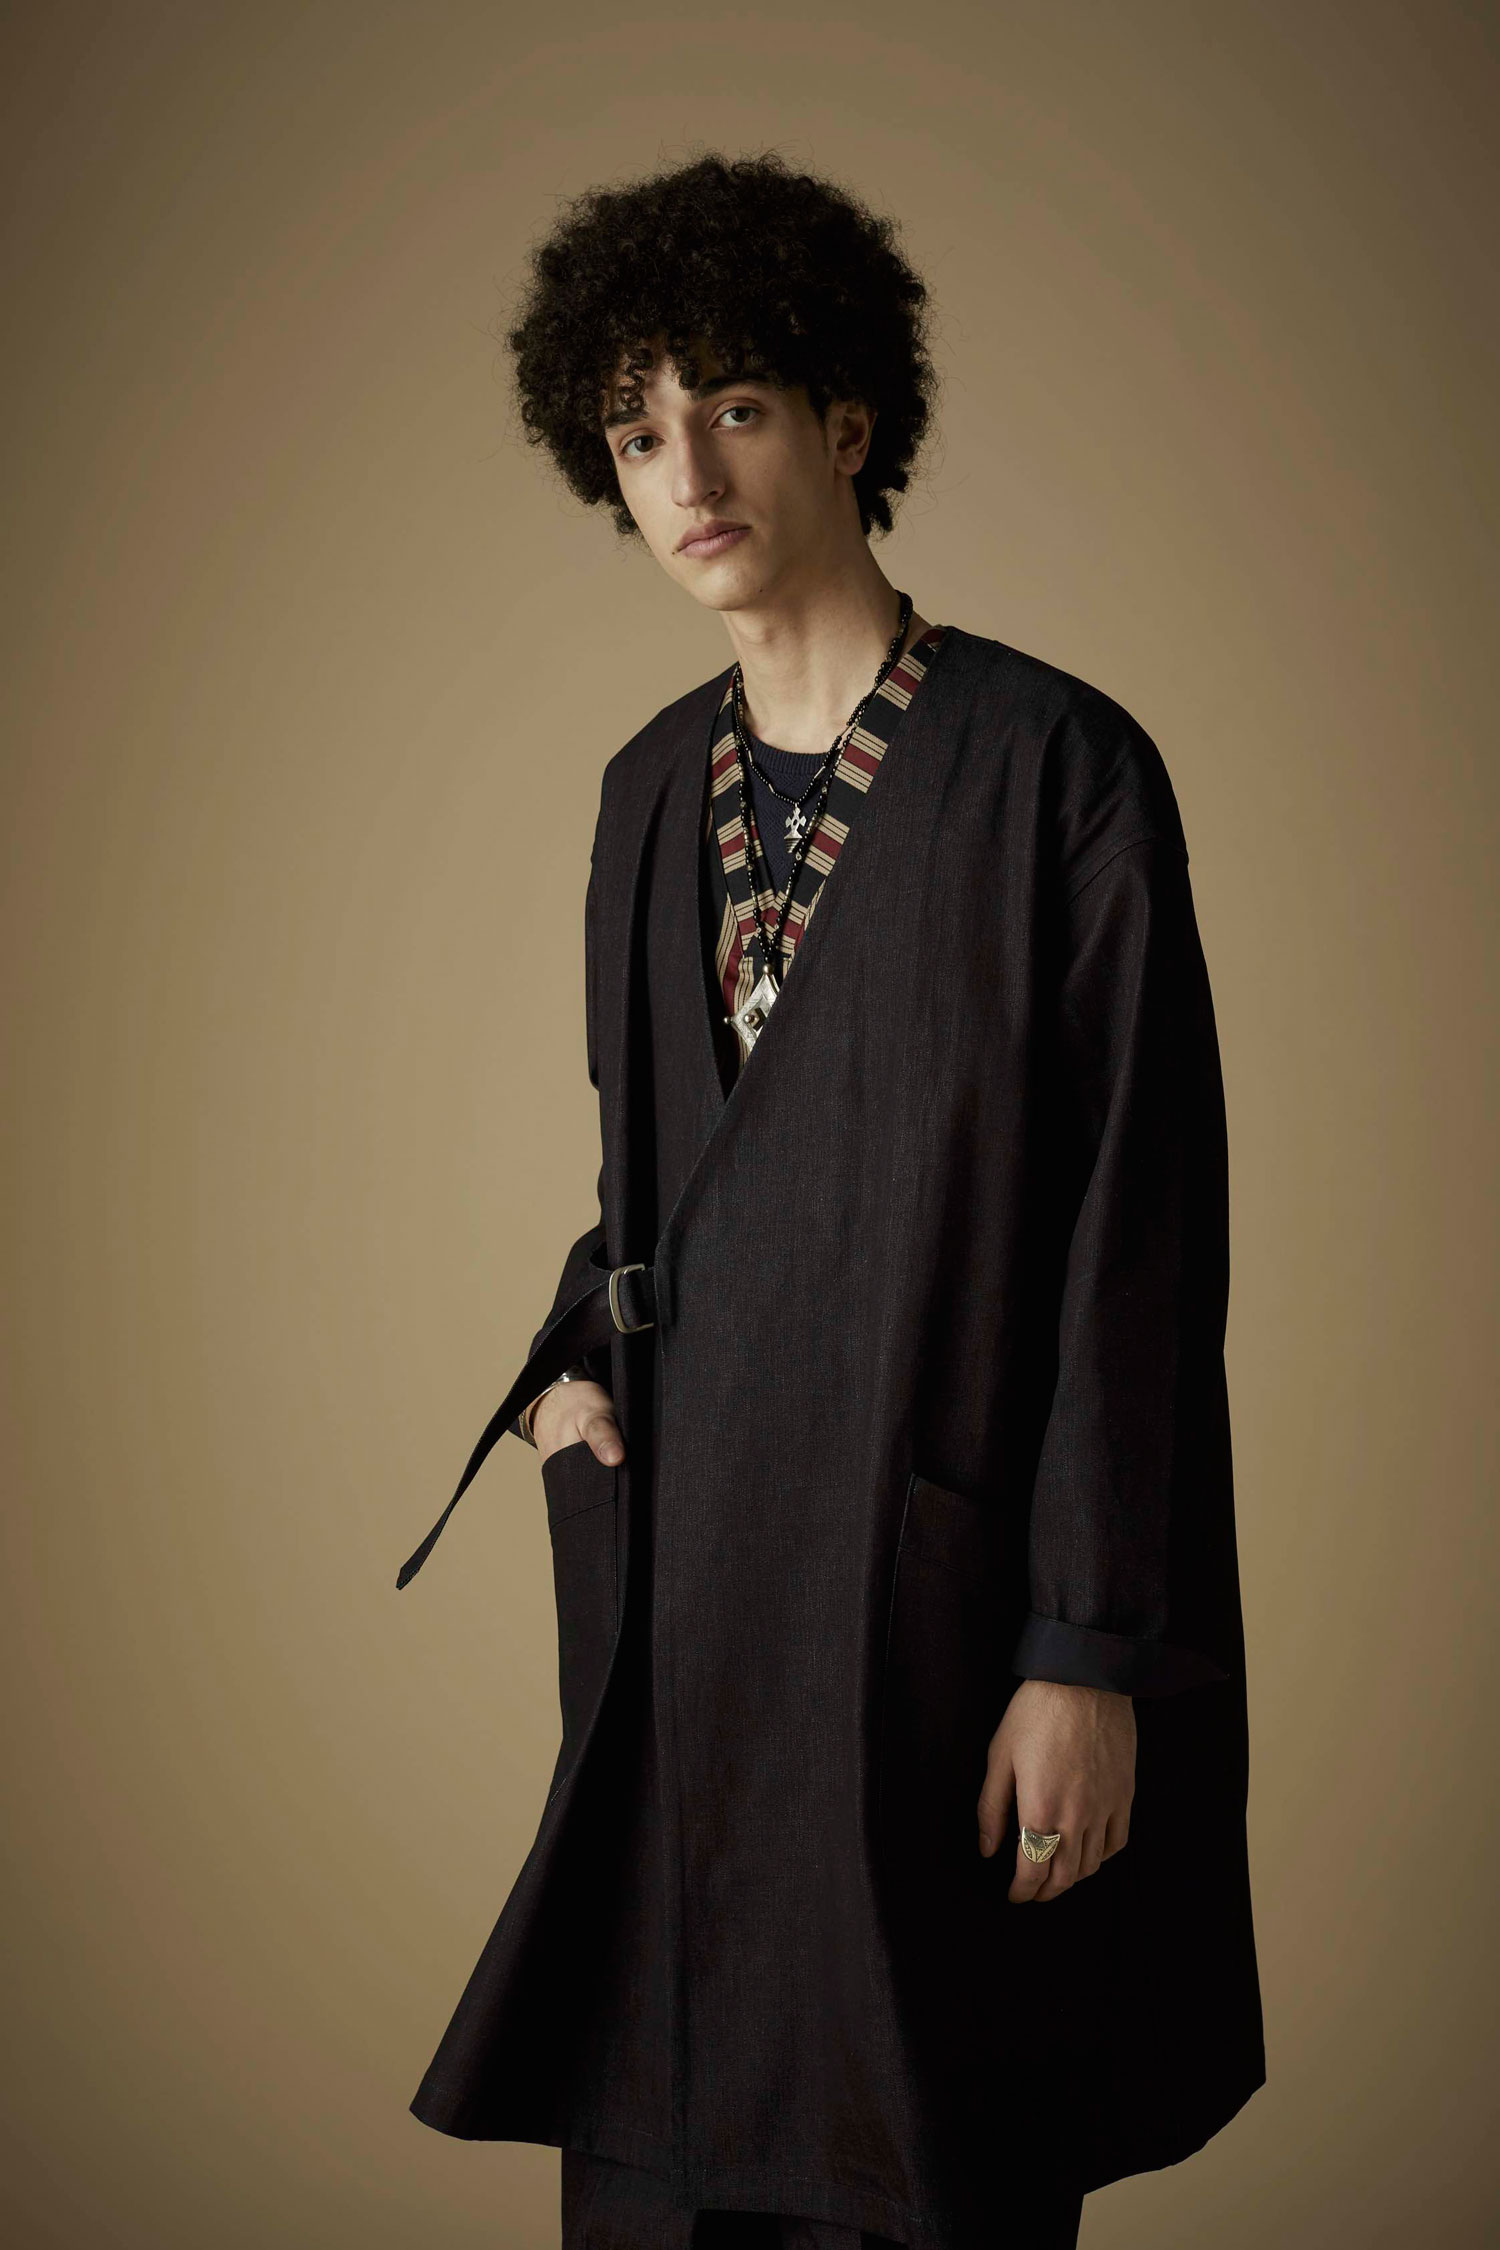 【MEN】JOHNBULL SPRING SUMMER 2019 MENS COLLECTION アイテム